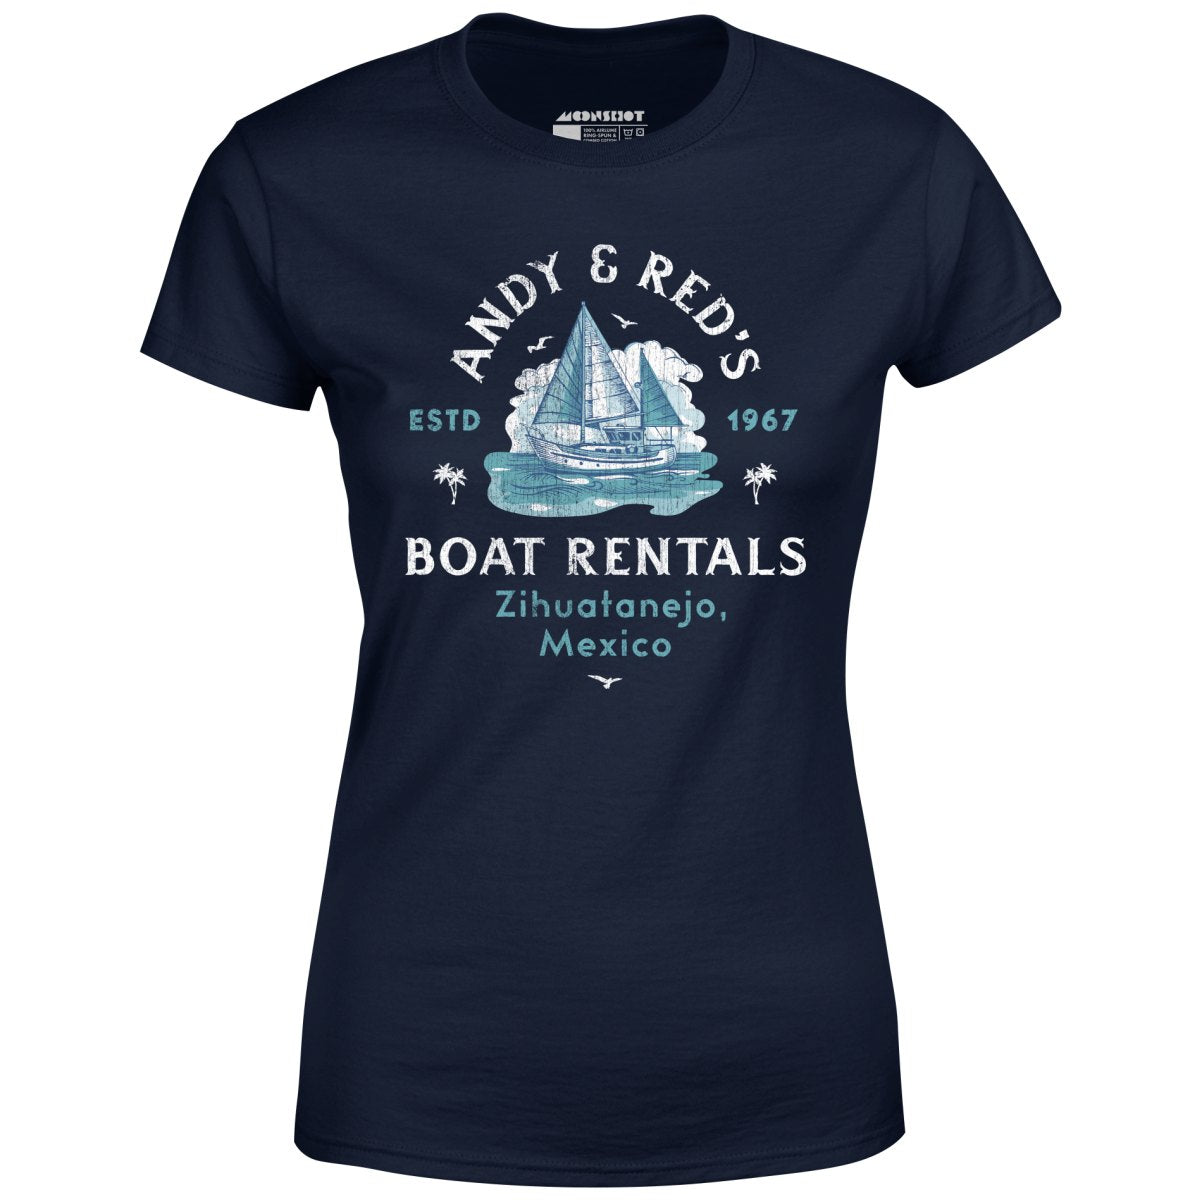 Andy & Red's Boat Rentals - Women's T-Shirt